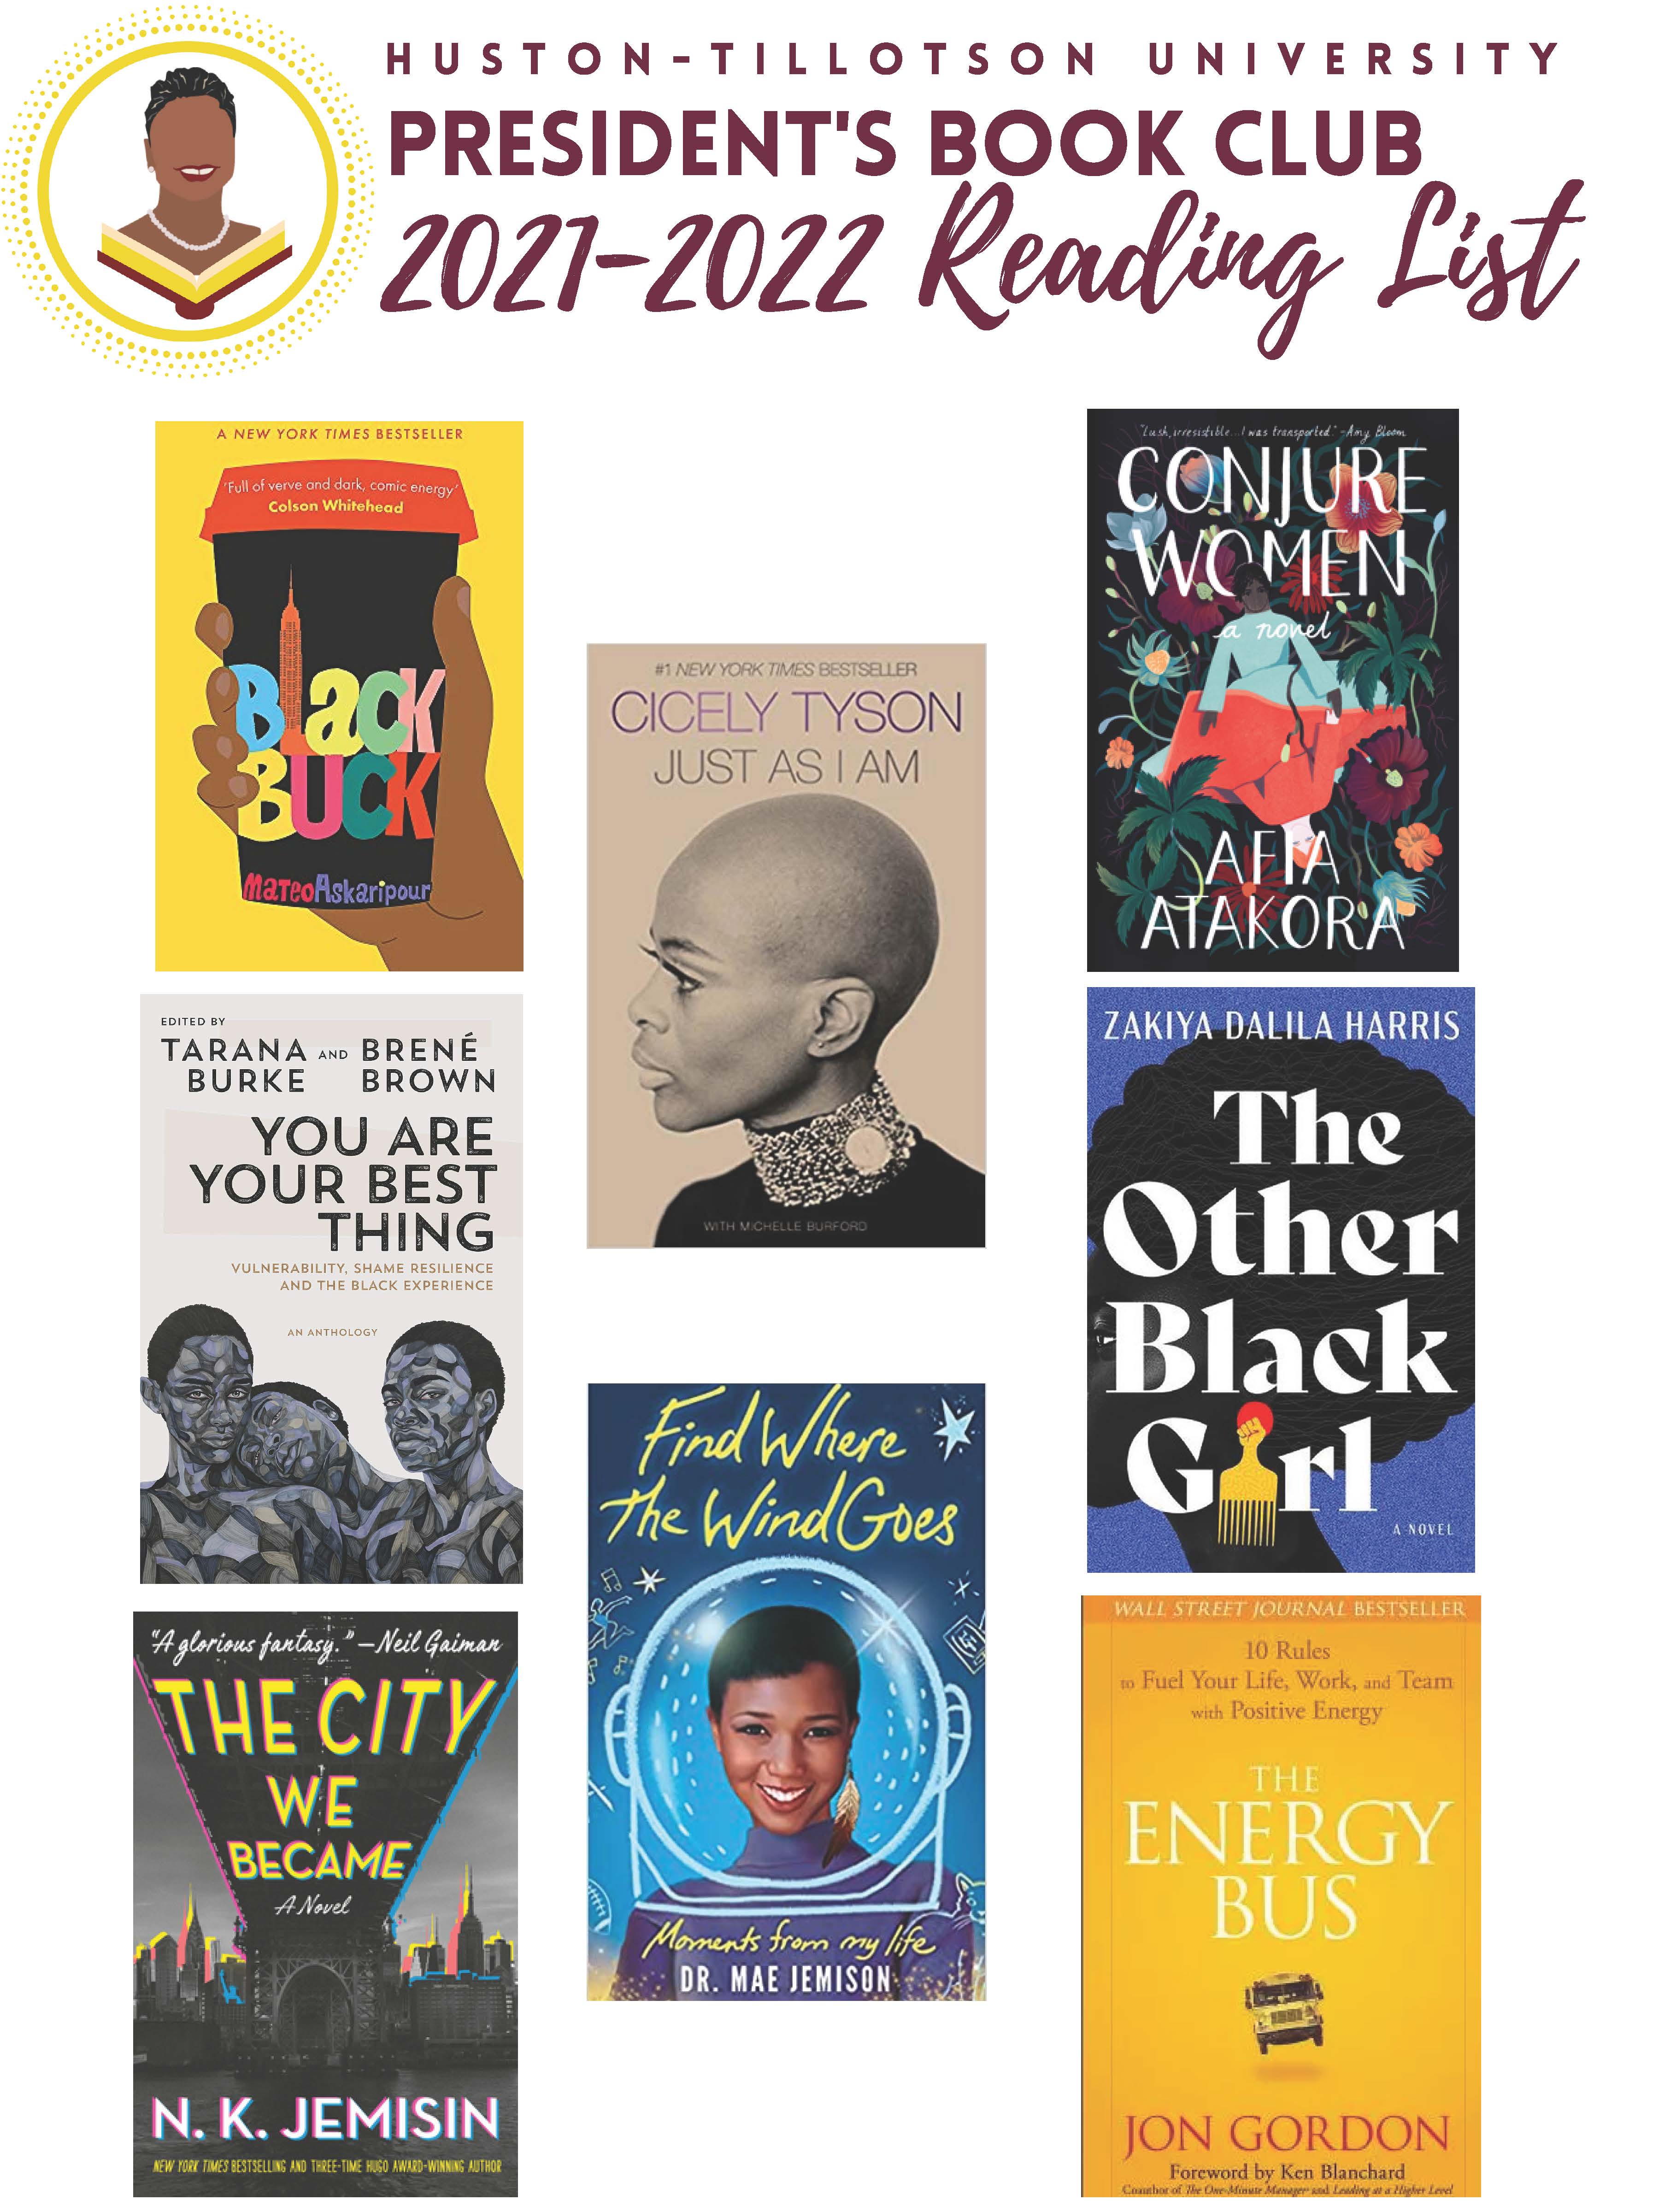 Collage of book covers for the President's Reading List